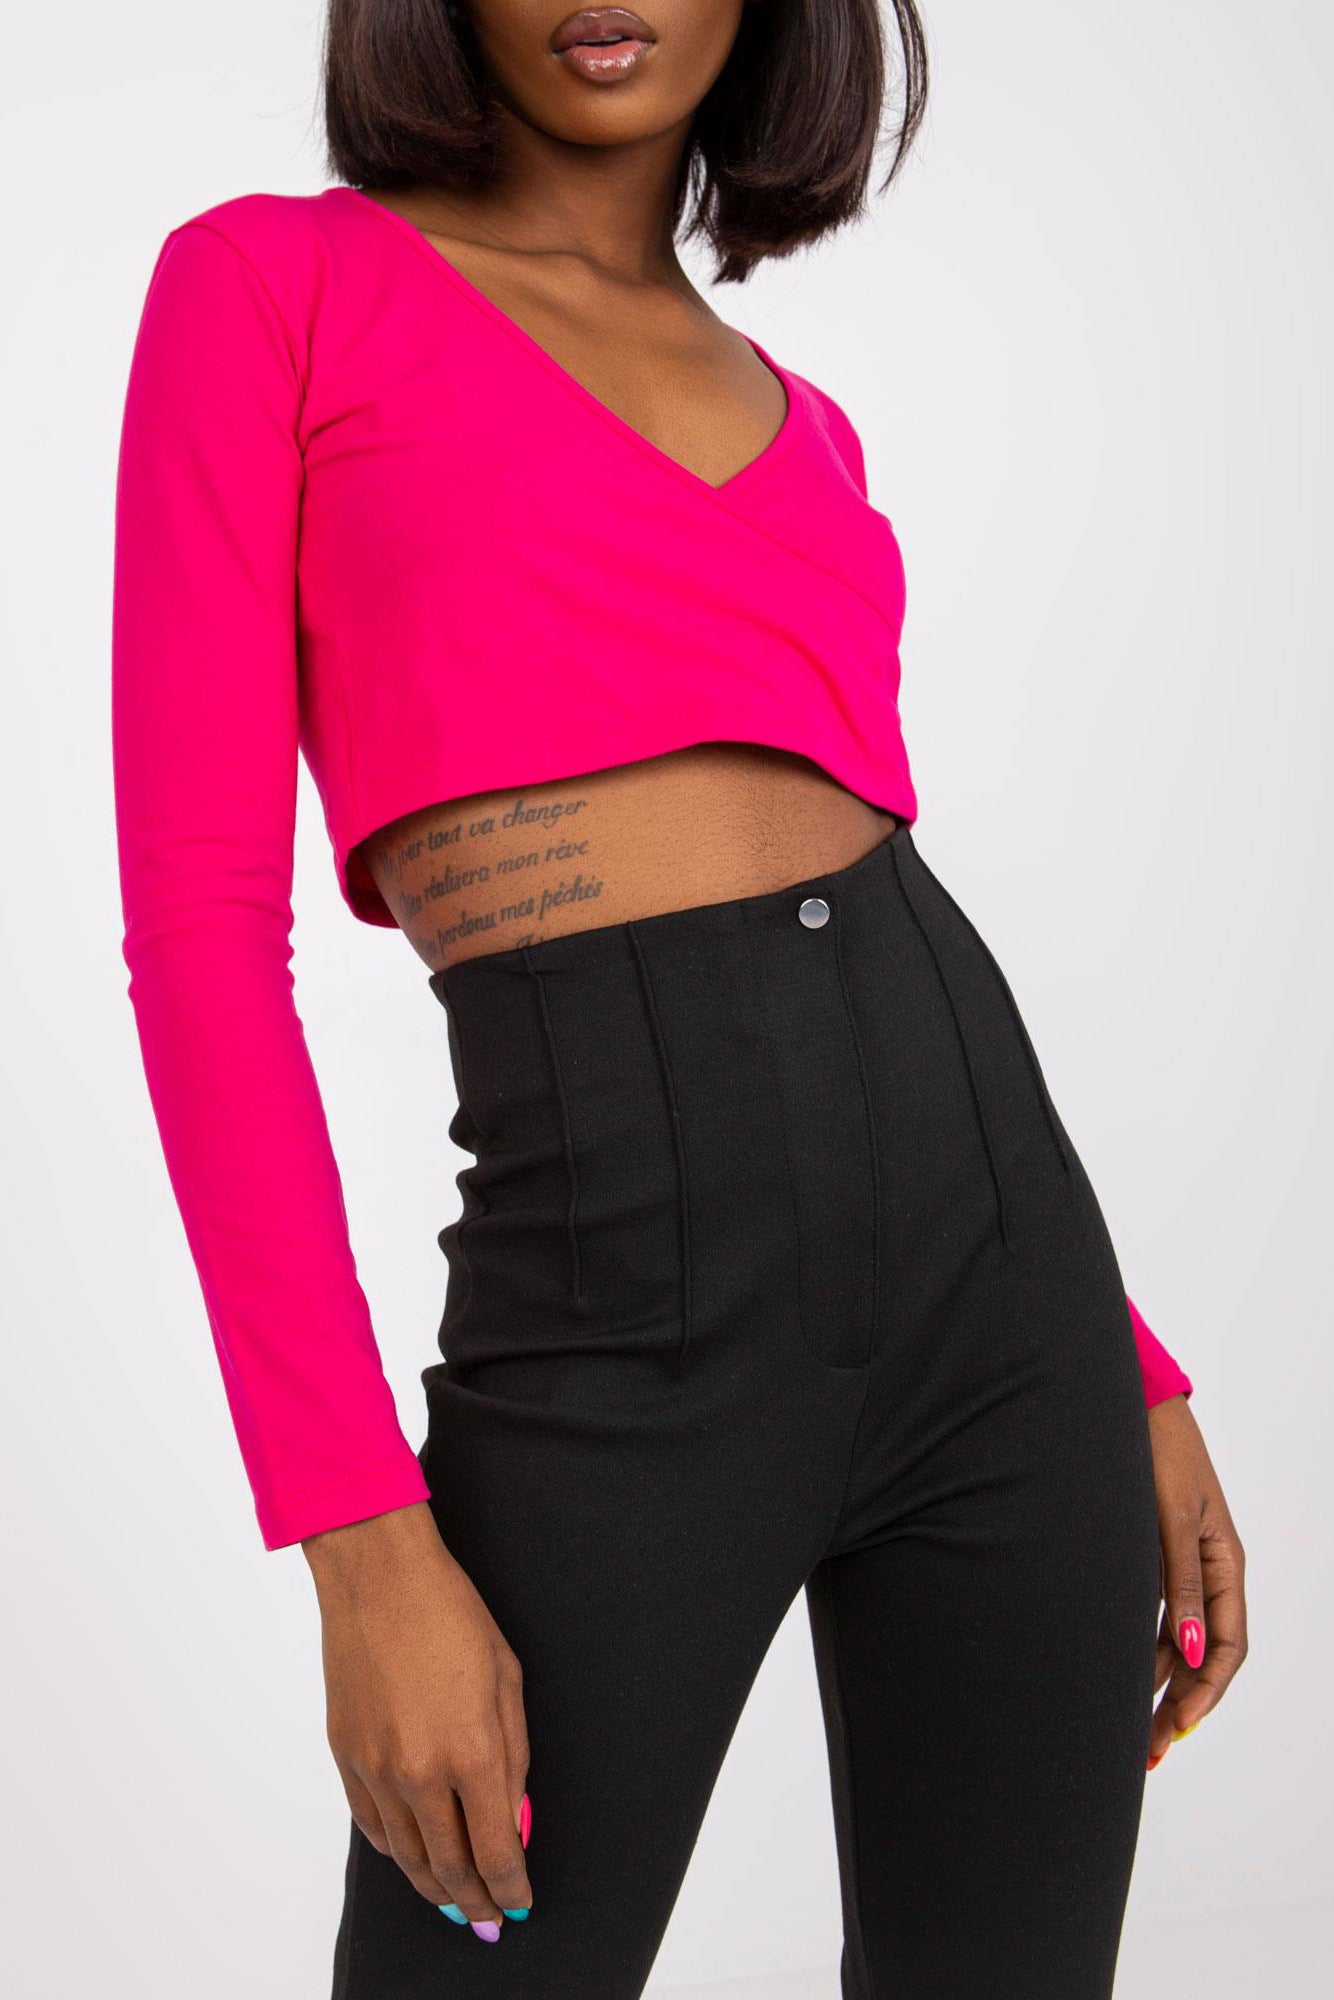 Discover style and comfort with our High-Waisted Black Leggings. Perfect for workwear or casual wear, these leggings offer a flattering high-waisted design and superior durability. Stay confident and comfortable all day.